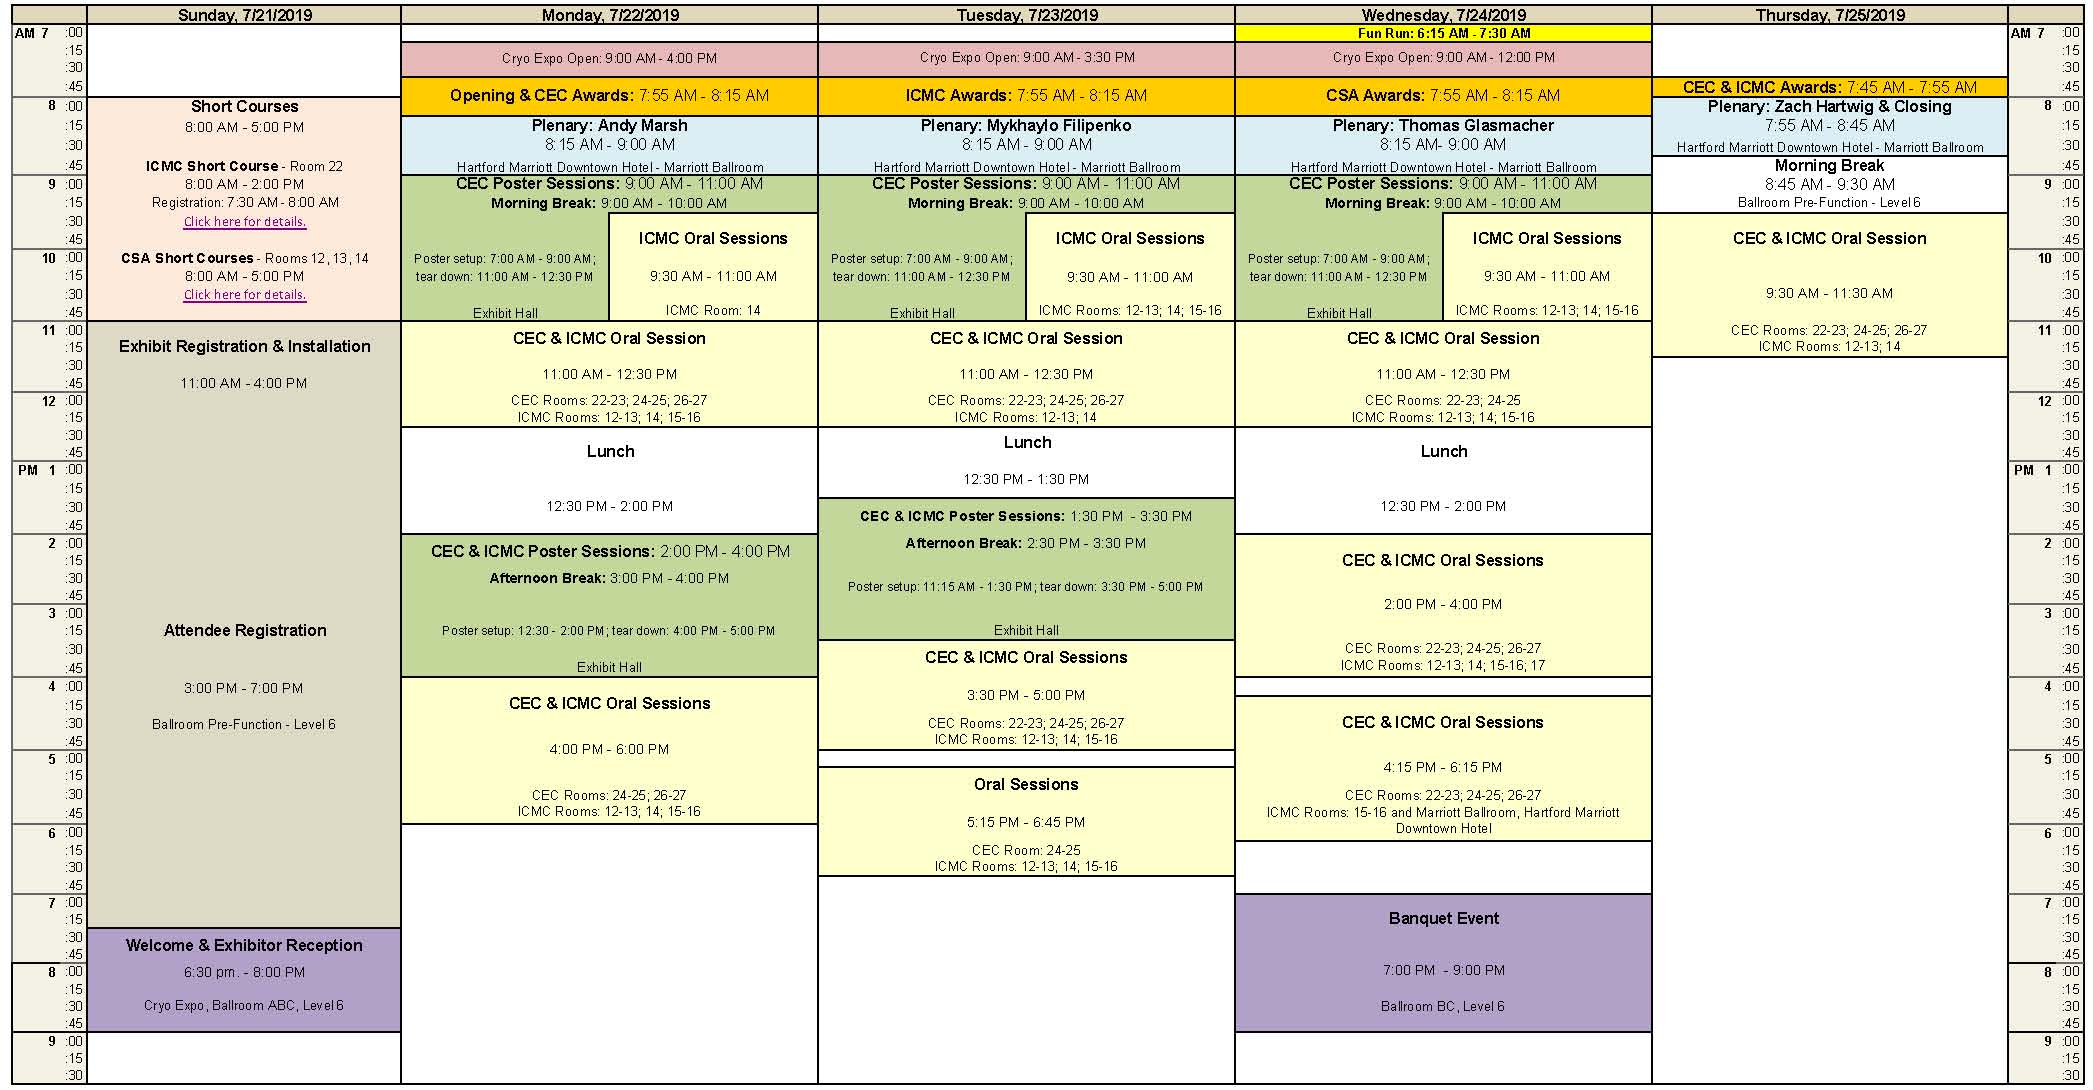 CEC-ICMC 2019 - Abstracts, Timetable and Presentations (21-25 July